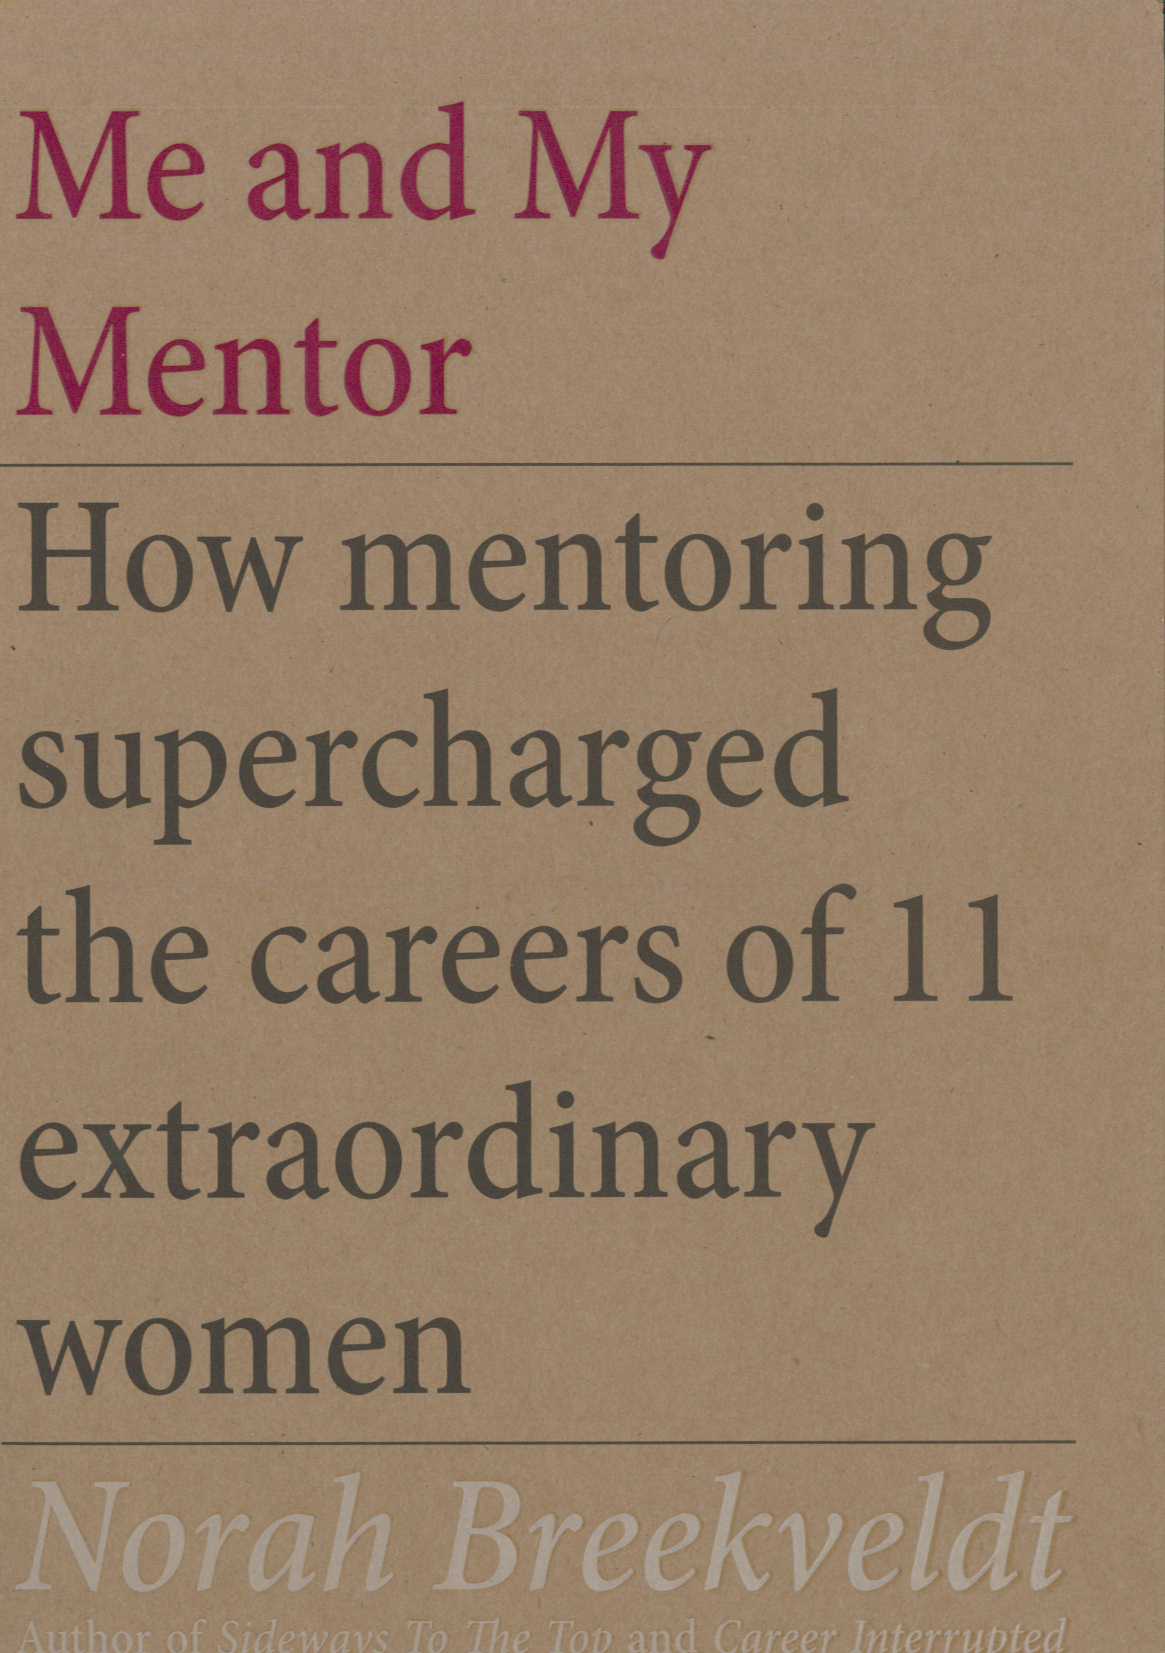 Me and My Mentor: How Mentoring supercharged the careers of